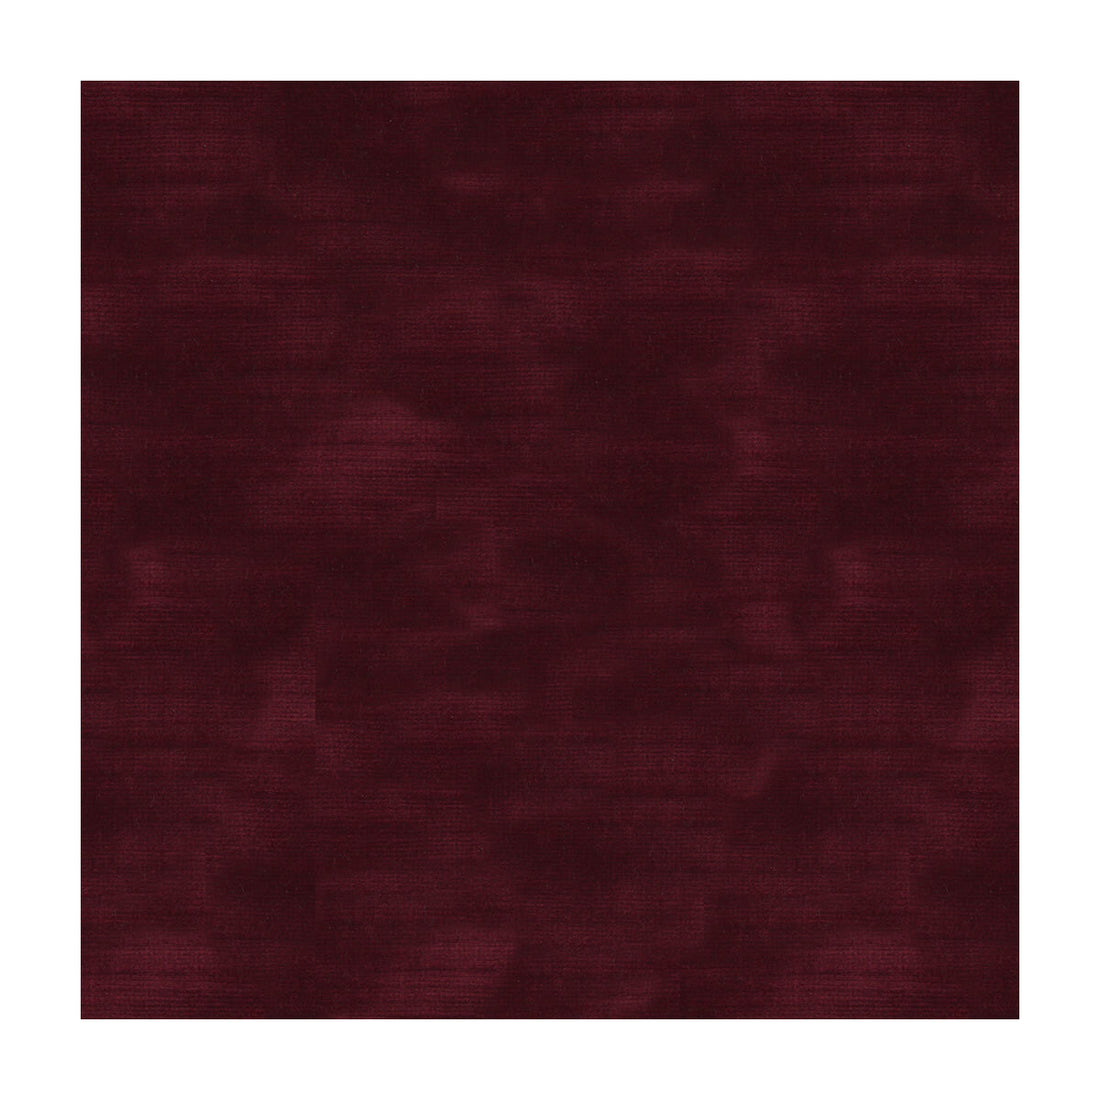 High Impact fabric in garnet color - pattern 34329.9.0 - by Kravet Couture